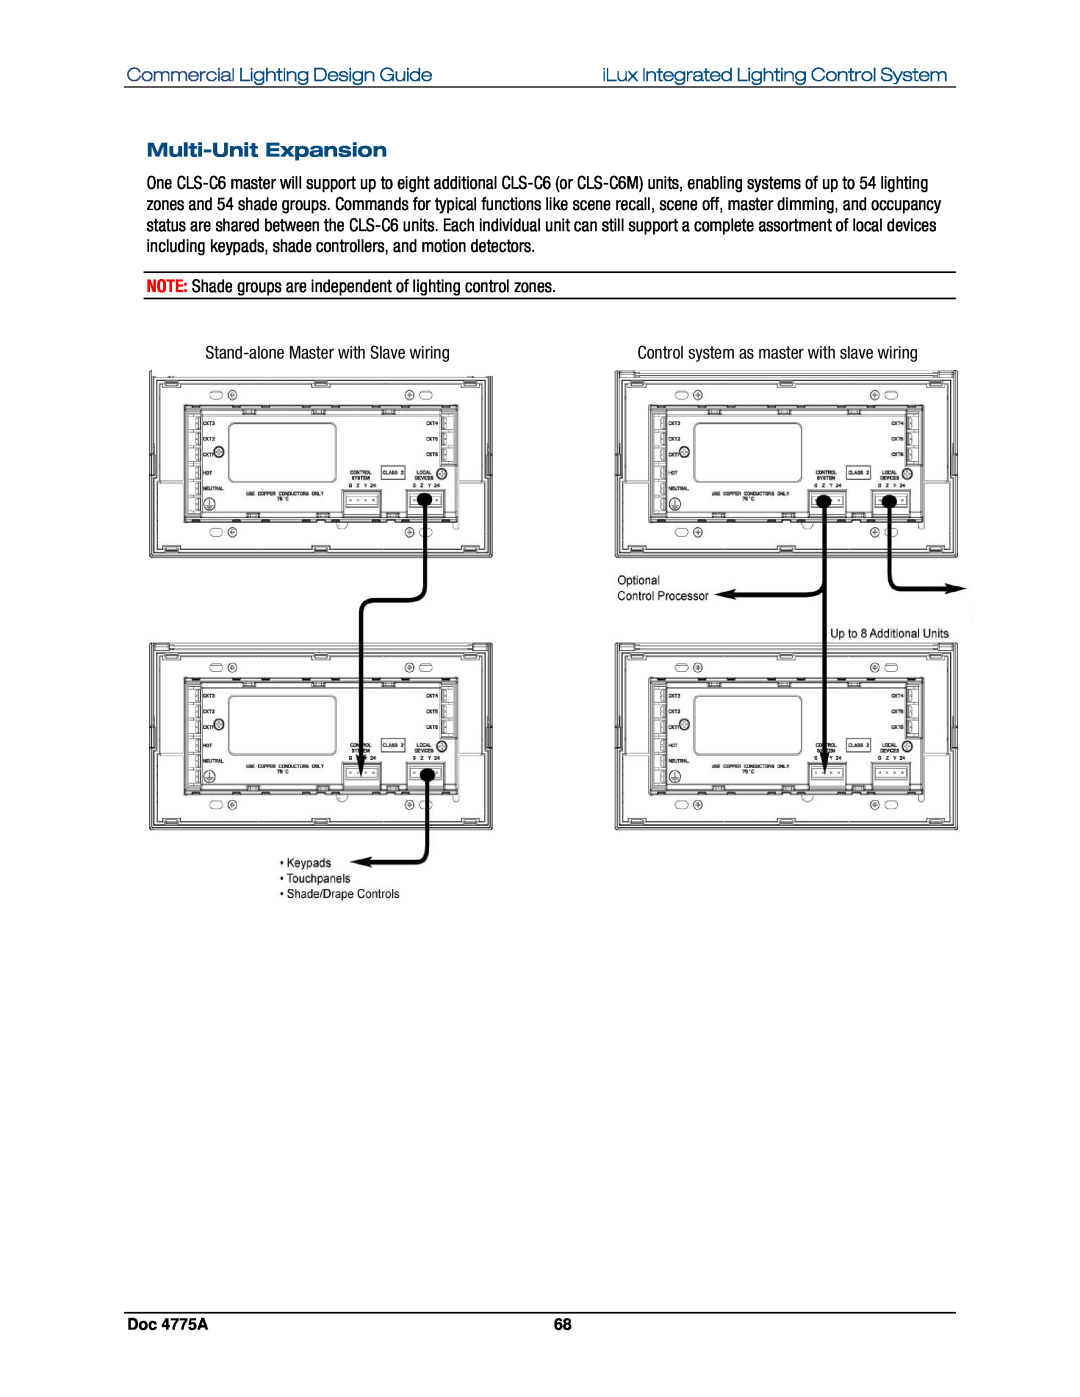 Crestron electronic IPAC-GL1 Multi-UnitExpansion, Commercial Lighting Design Guide, Stand-aloneMaster with Slave wiring 